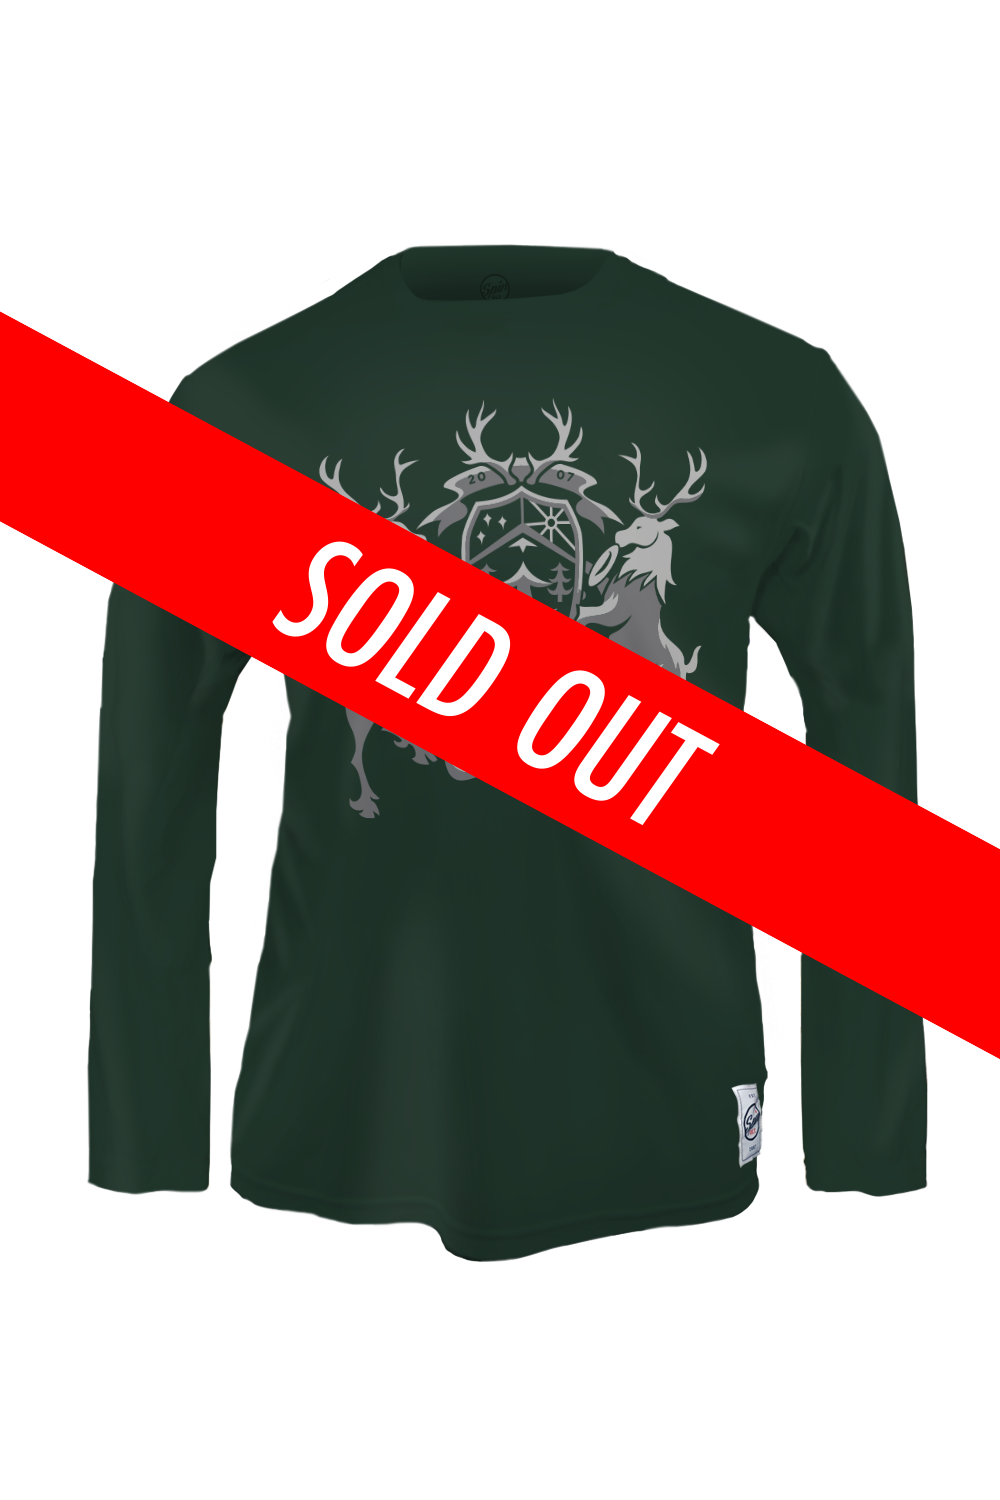 Crest Long Sleeve Jersey (Forest)